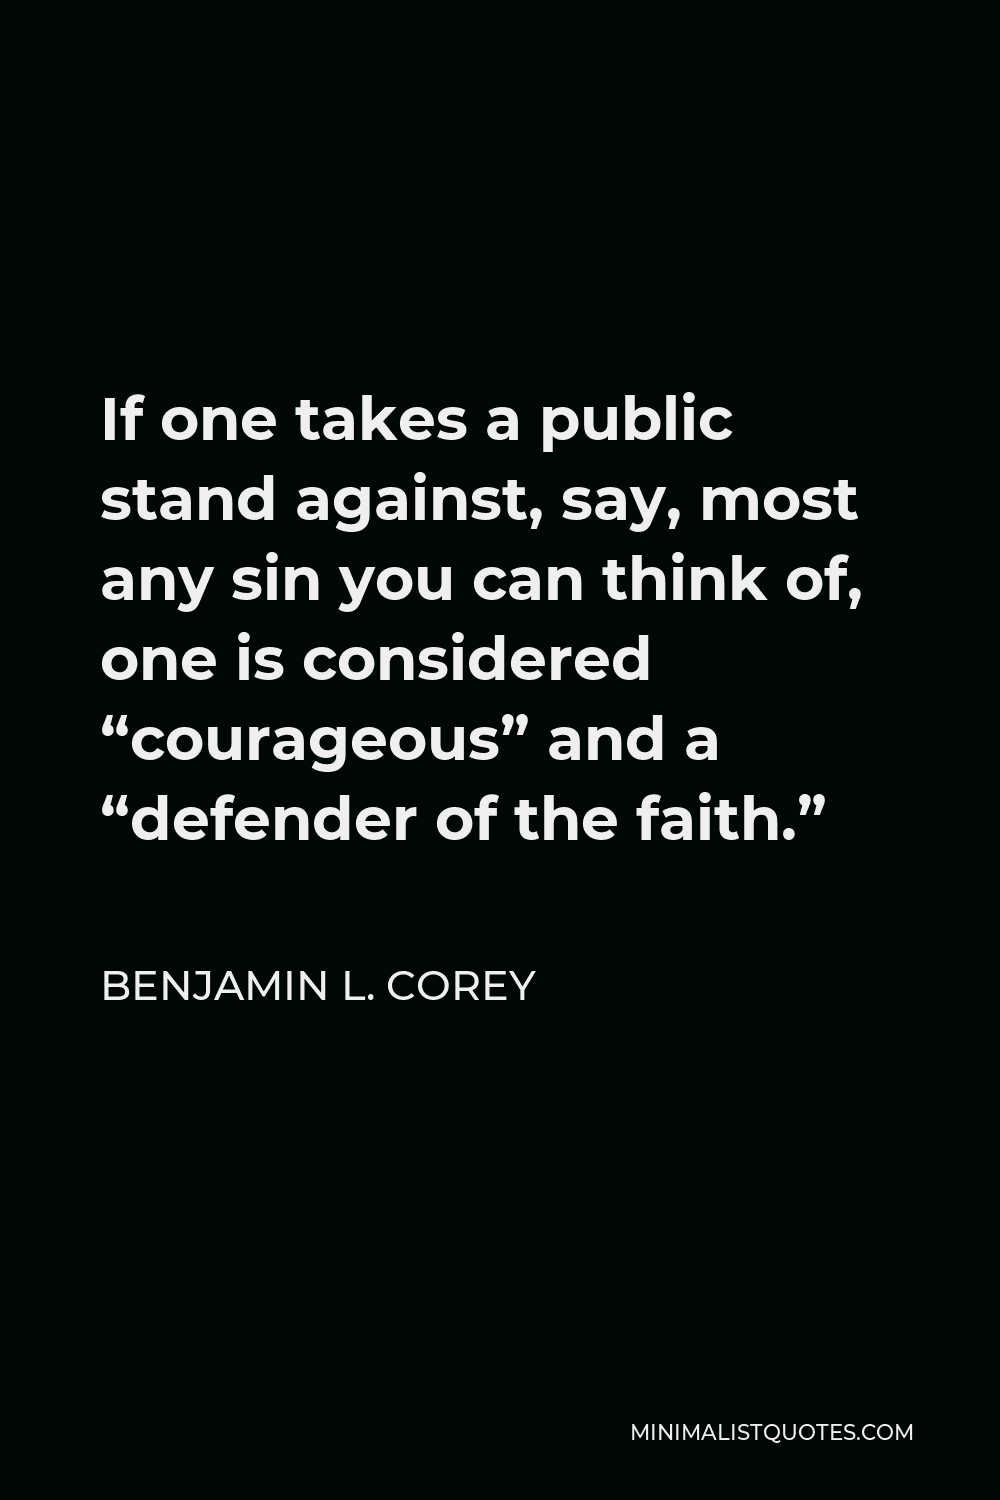 Benjamin L. Corey Quote - If one takes a public stand against, say, most any sin you can think of, one is considered “courageous” and a “defender of the faith.”